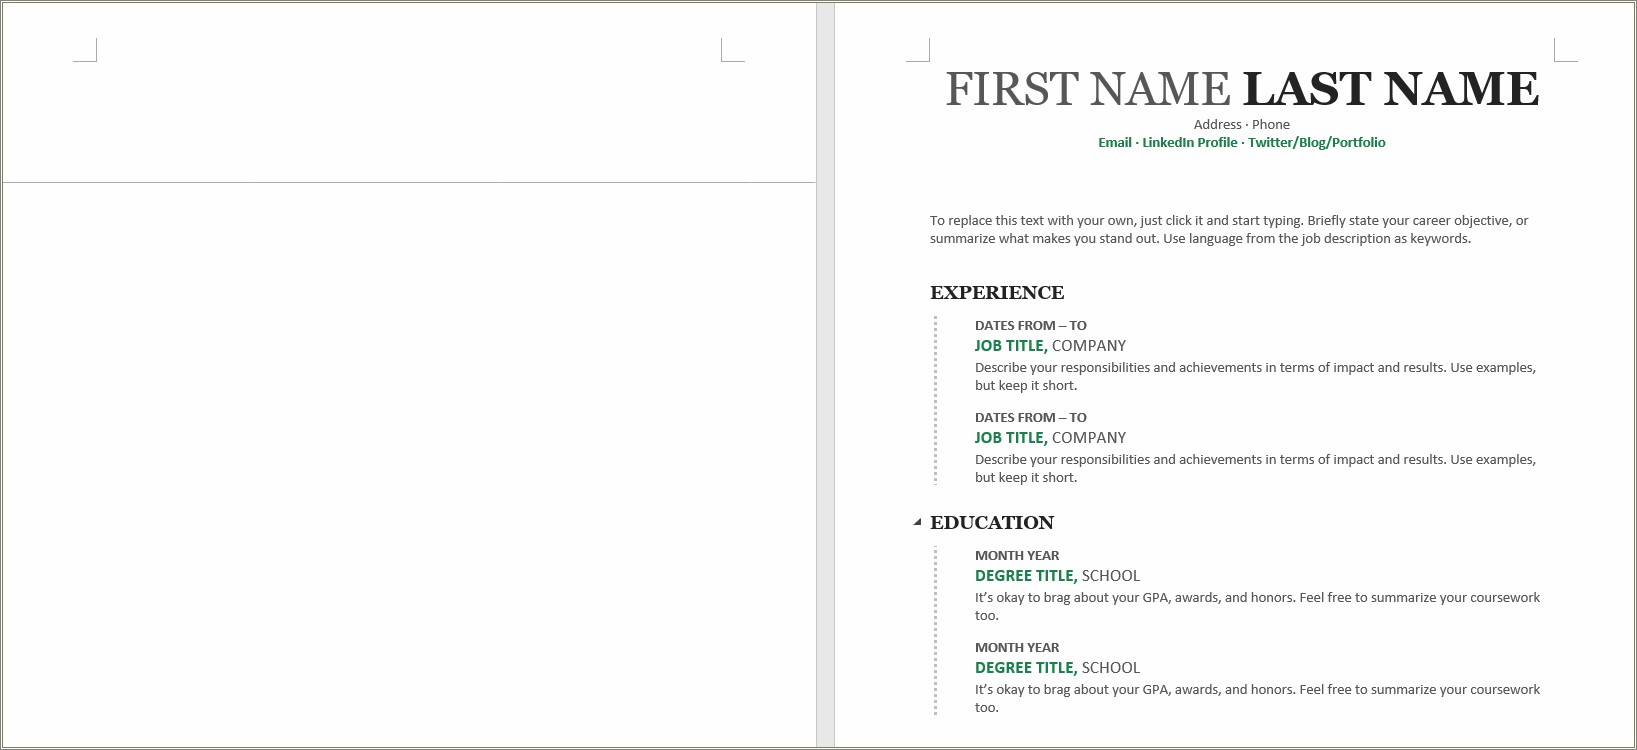 Delete Horizontal Line In Word Chronological Template Resume